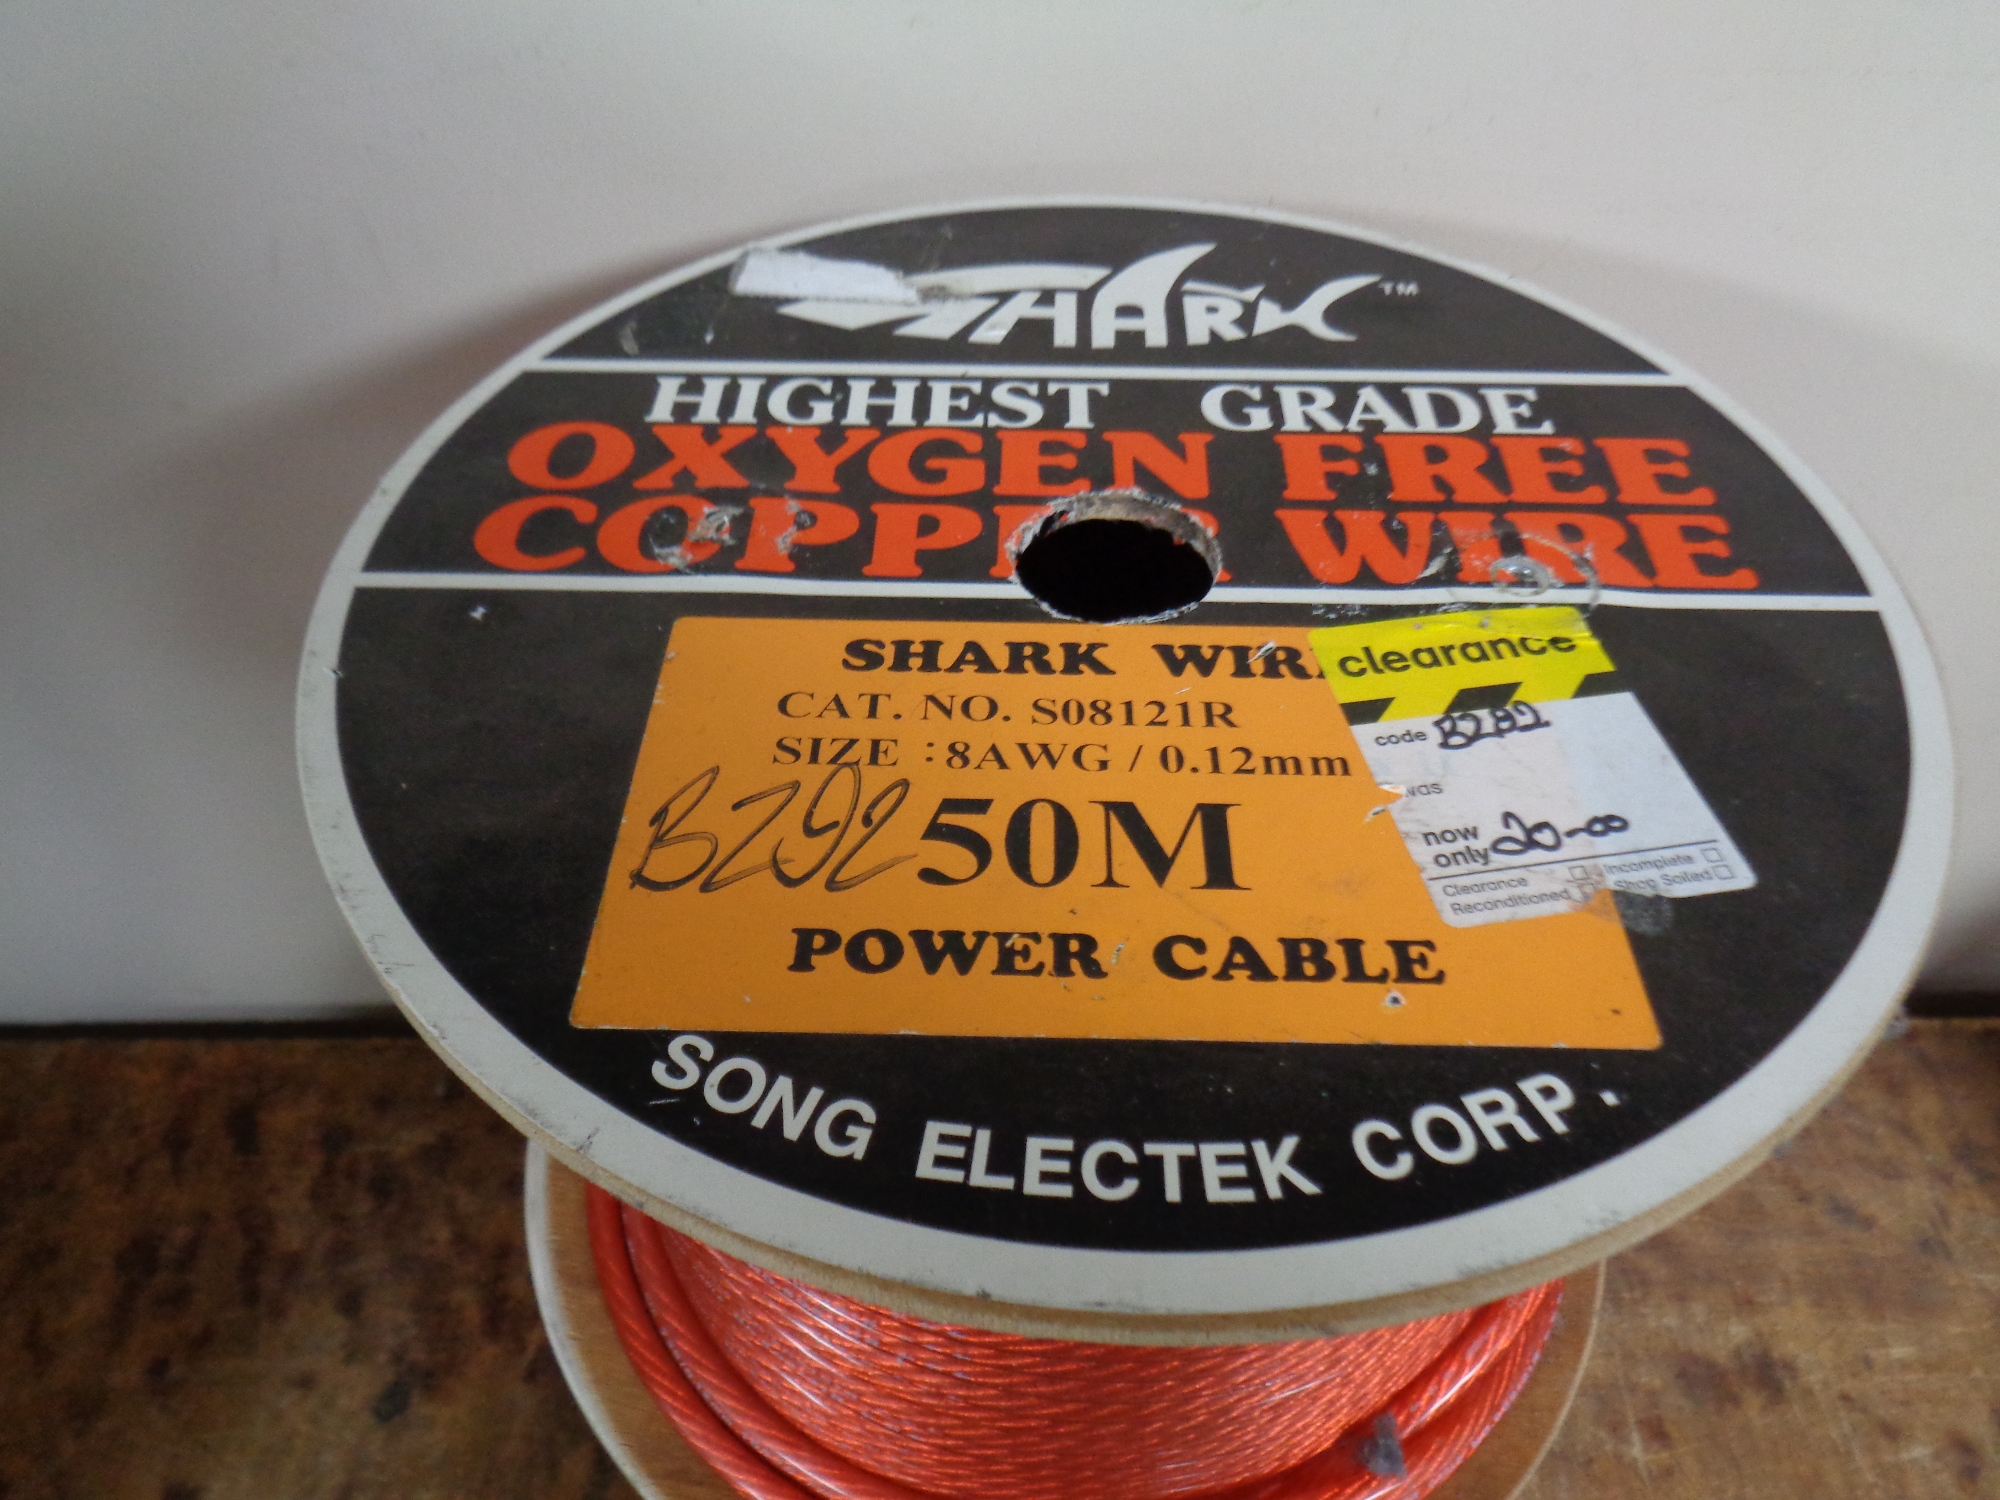 Two spools of Shark high grade copper audio/signal cable (red) - Image 2 of 2